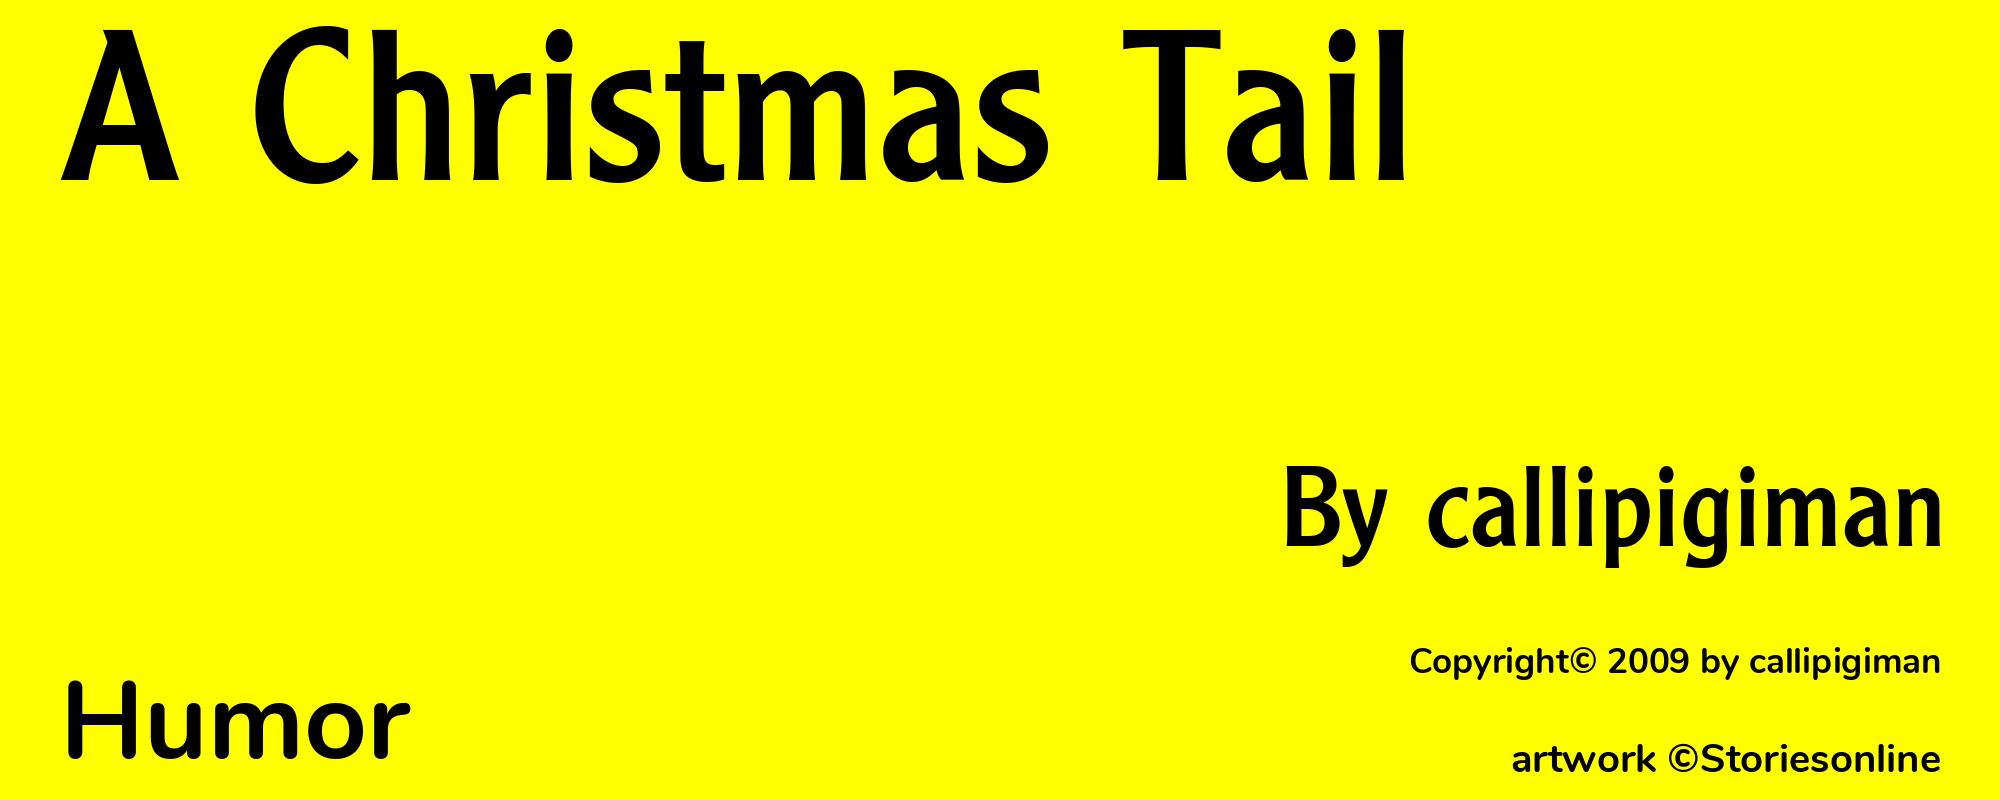 A Christmas Tail - Cover